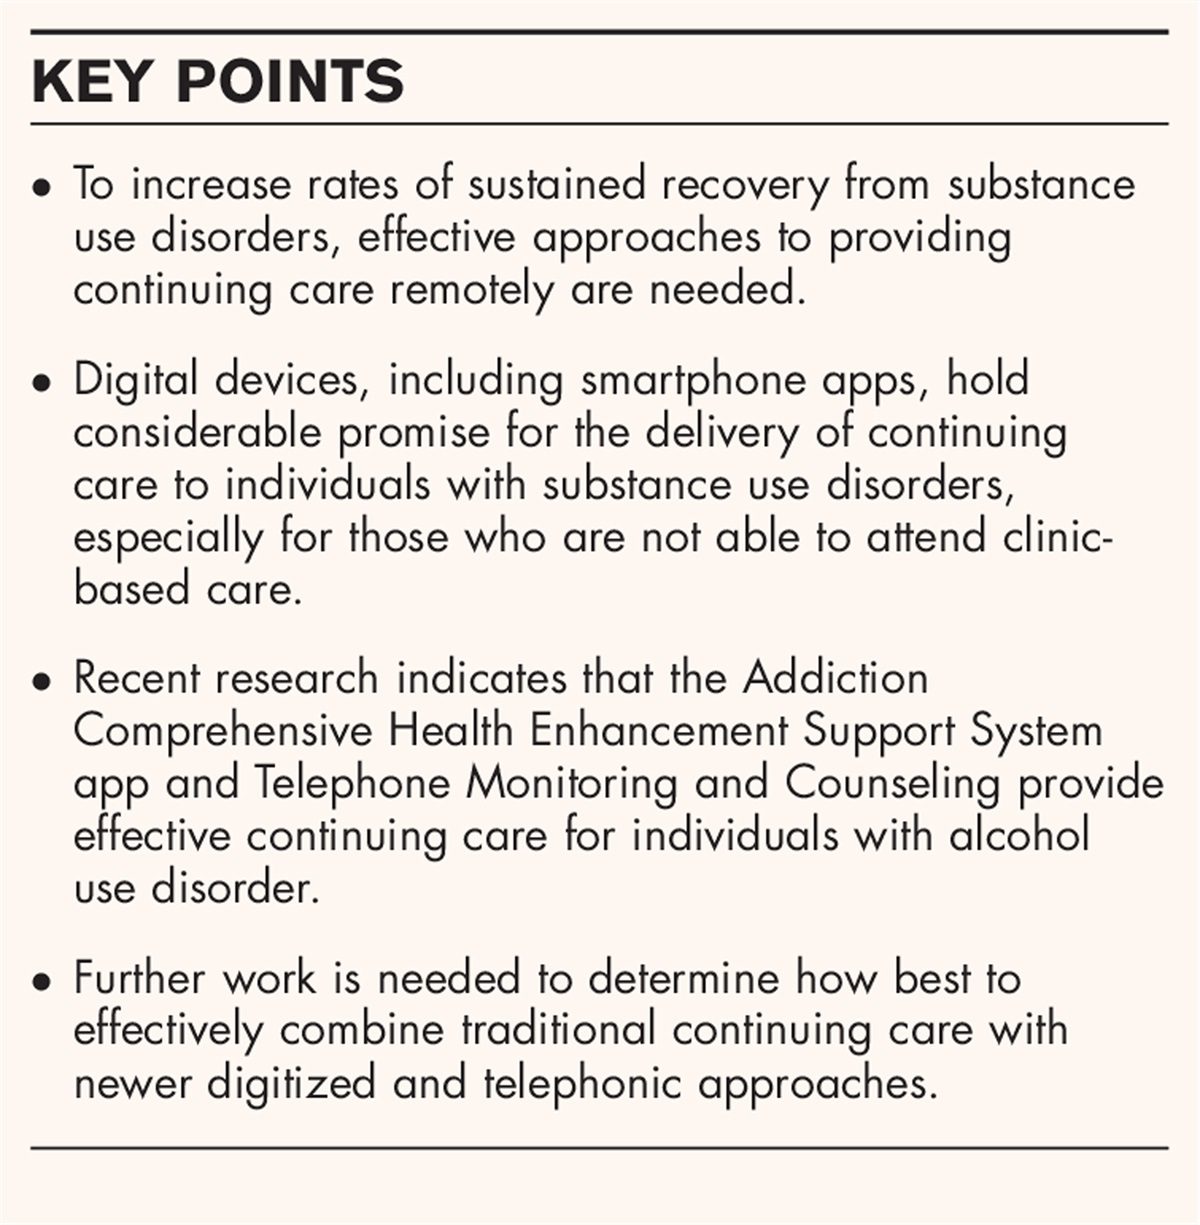 Digital approaches to continuing care